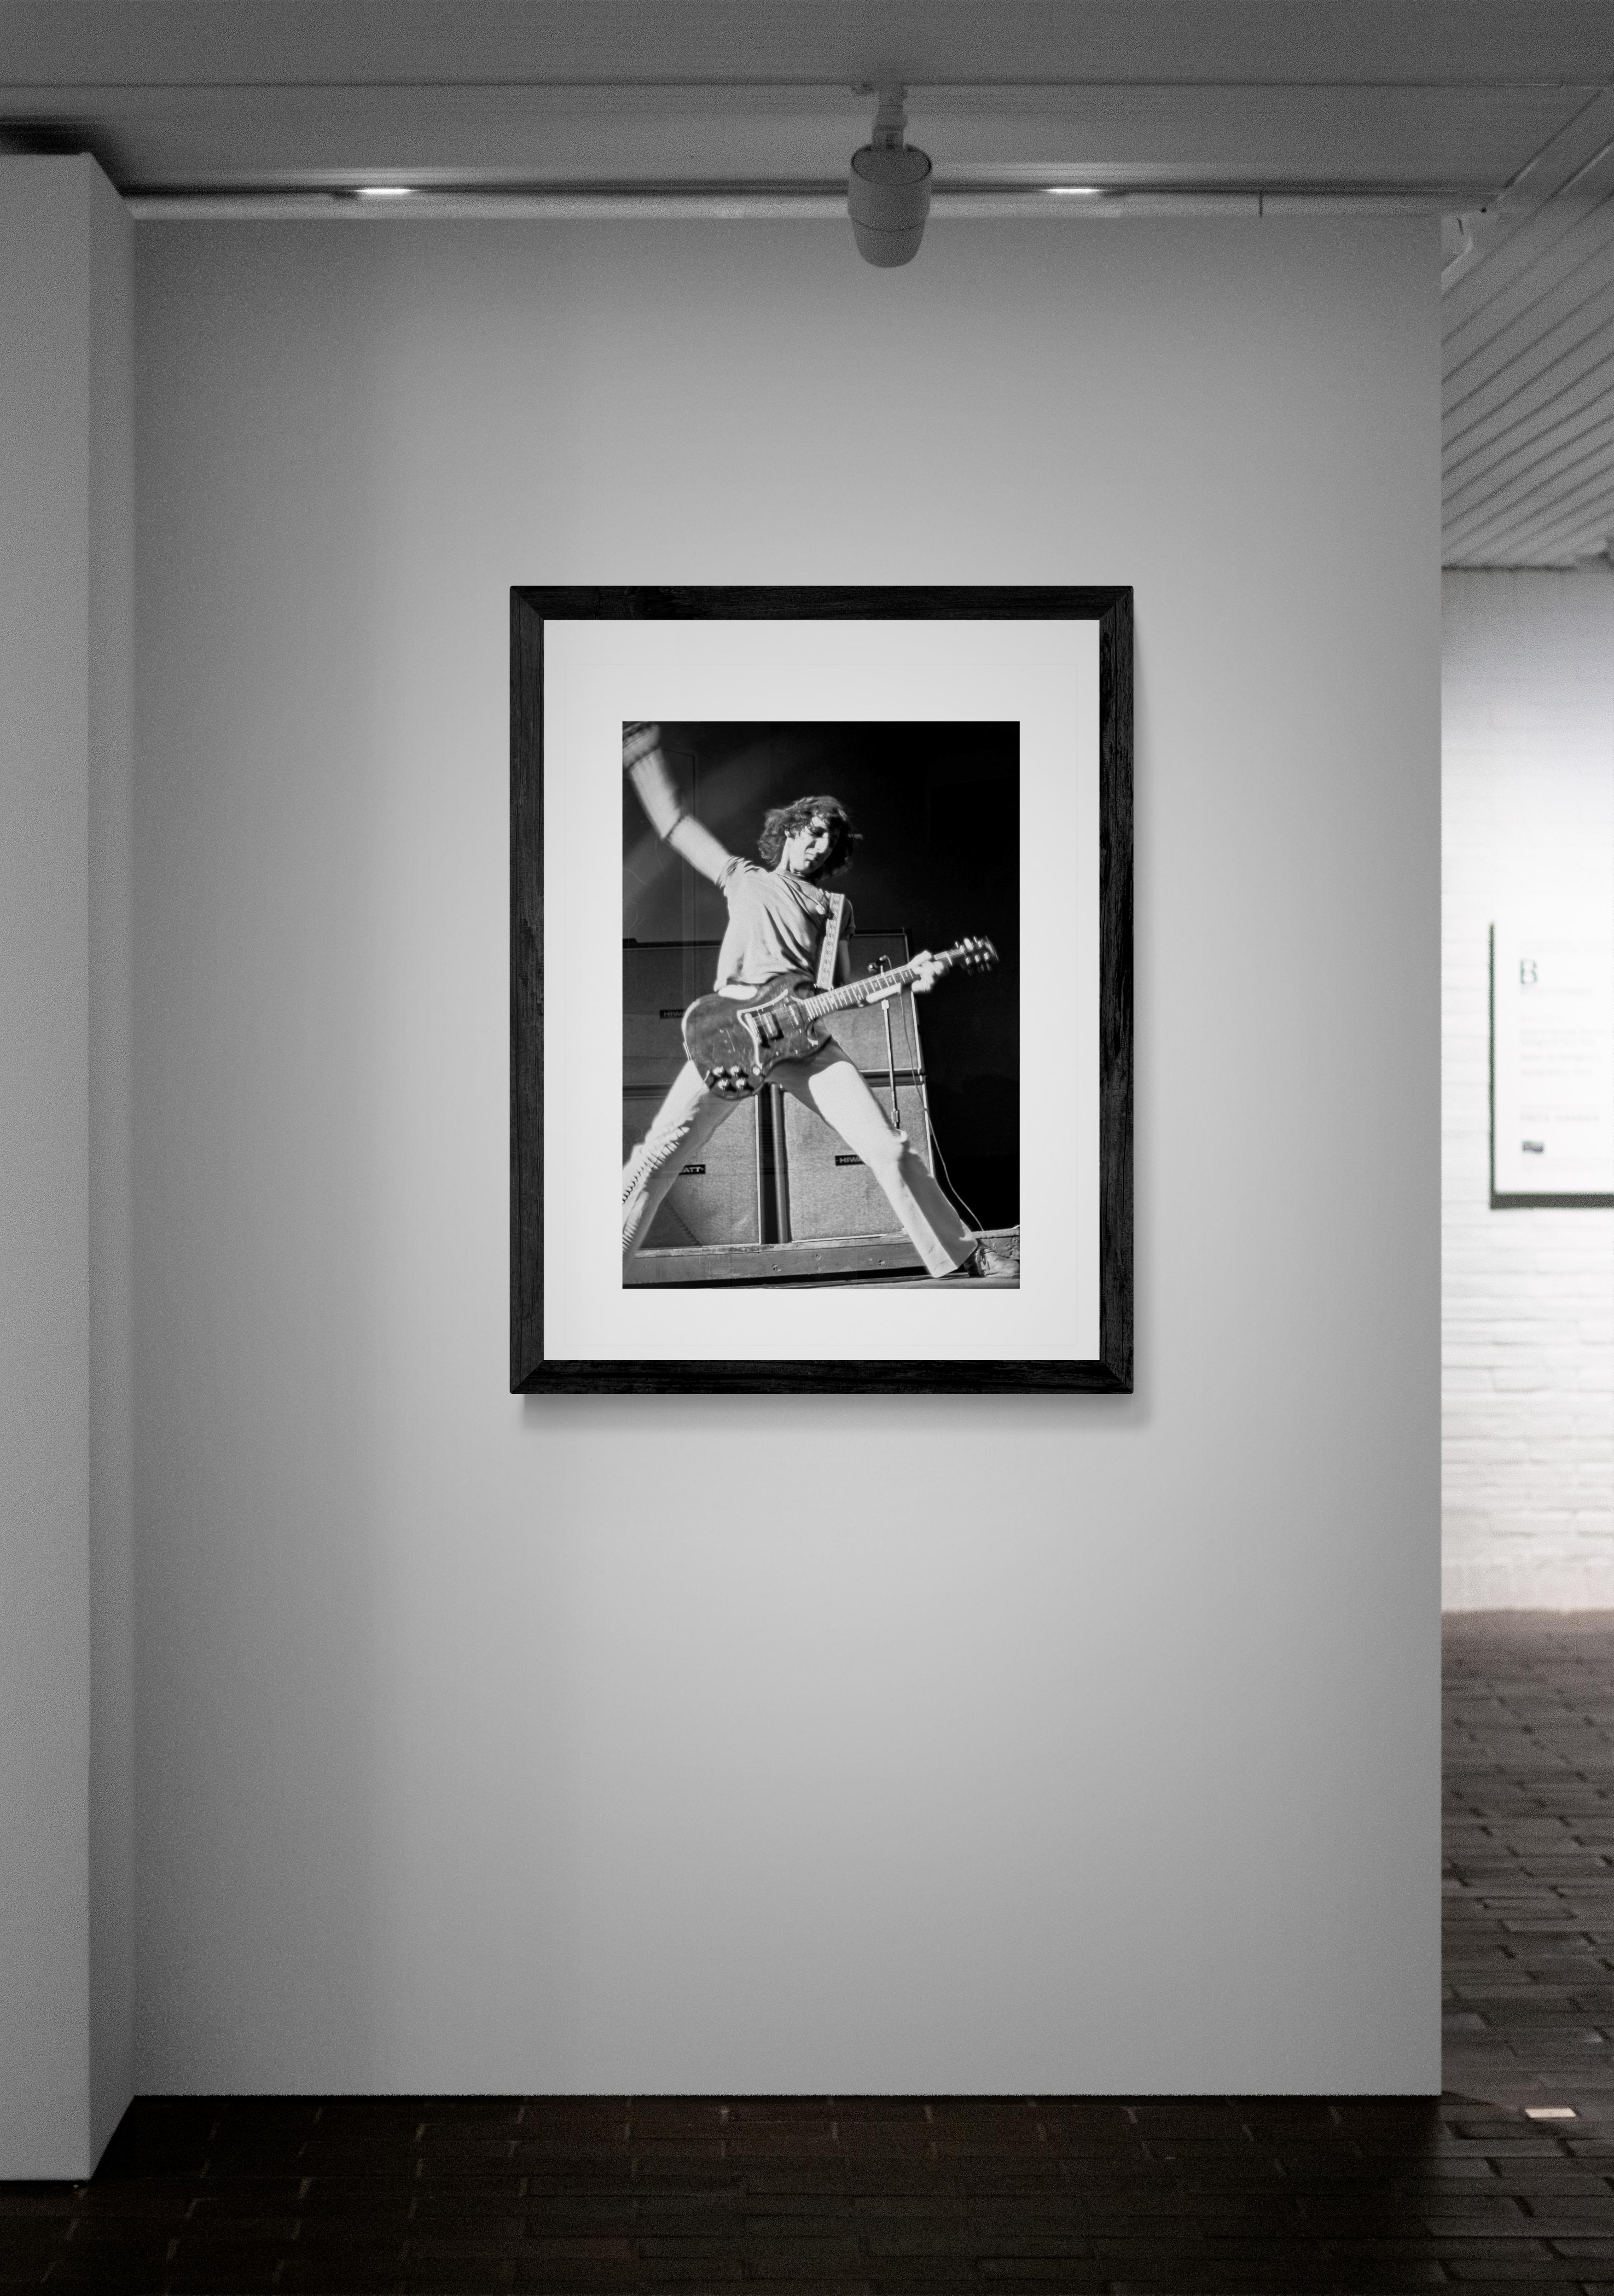 Pete Townsends’s trademark windmill style guitar playing is captured while The Who tours in support of their seminal album ‘Who’s Next” in Forest Hills, New York, 1971. 

Artist: Jeffrey Mayer
Limited Edition: Signed and hand numbered in the margin,